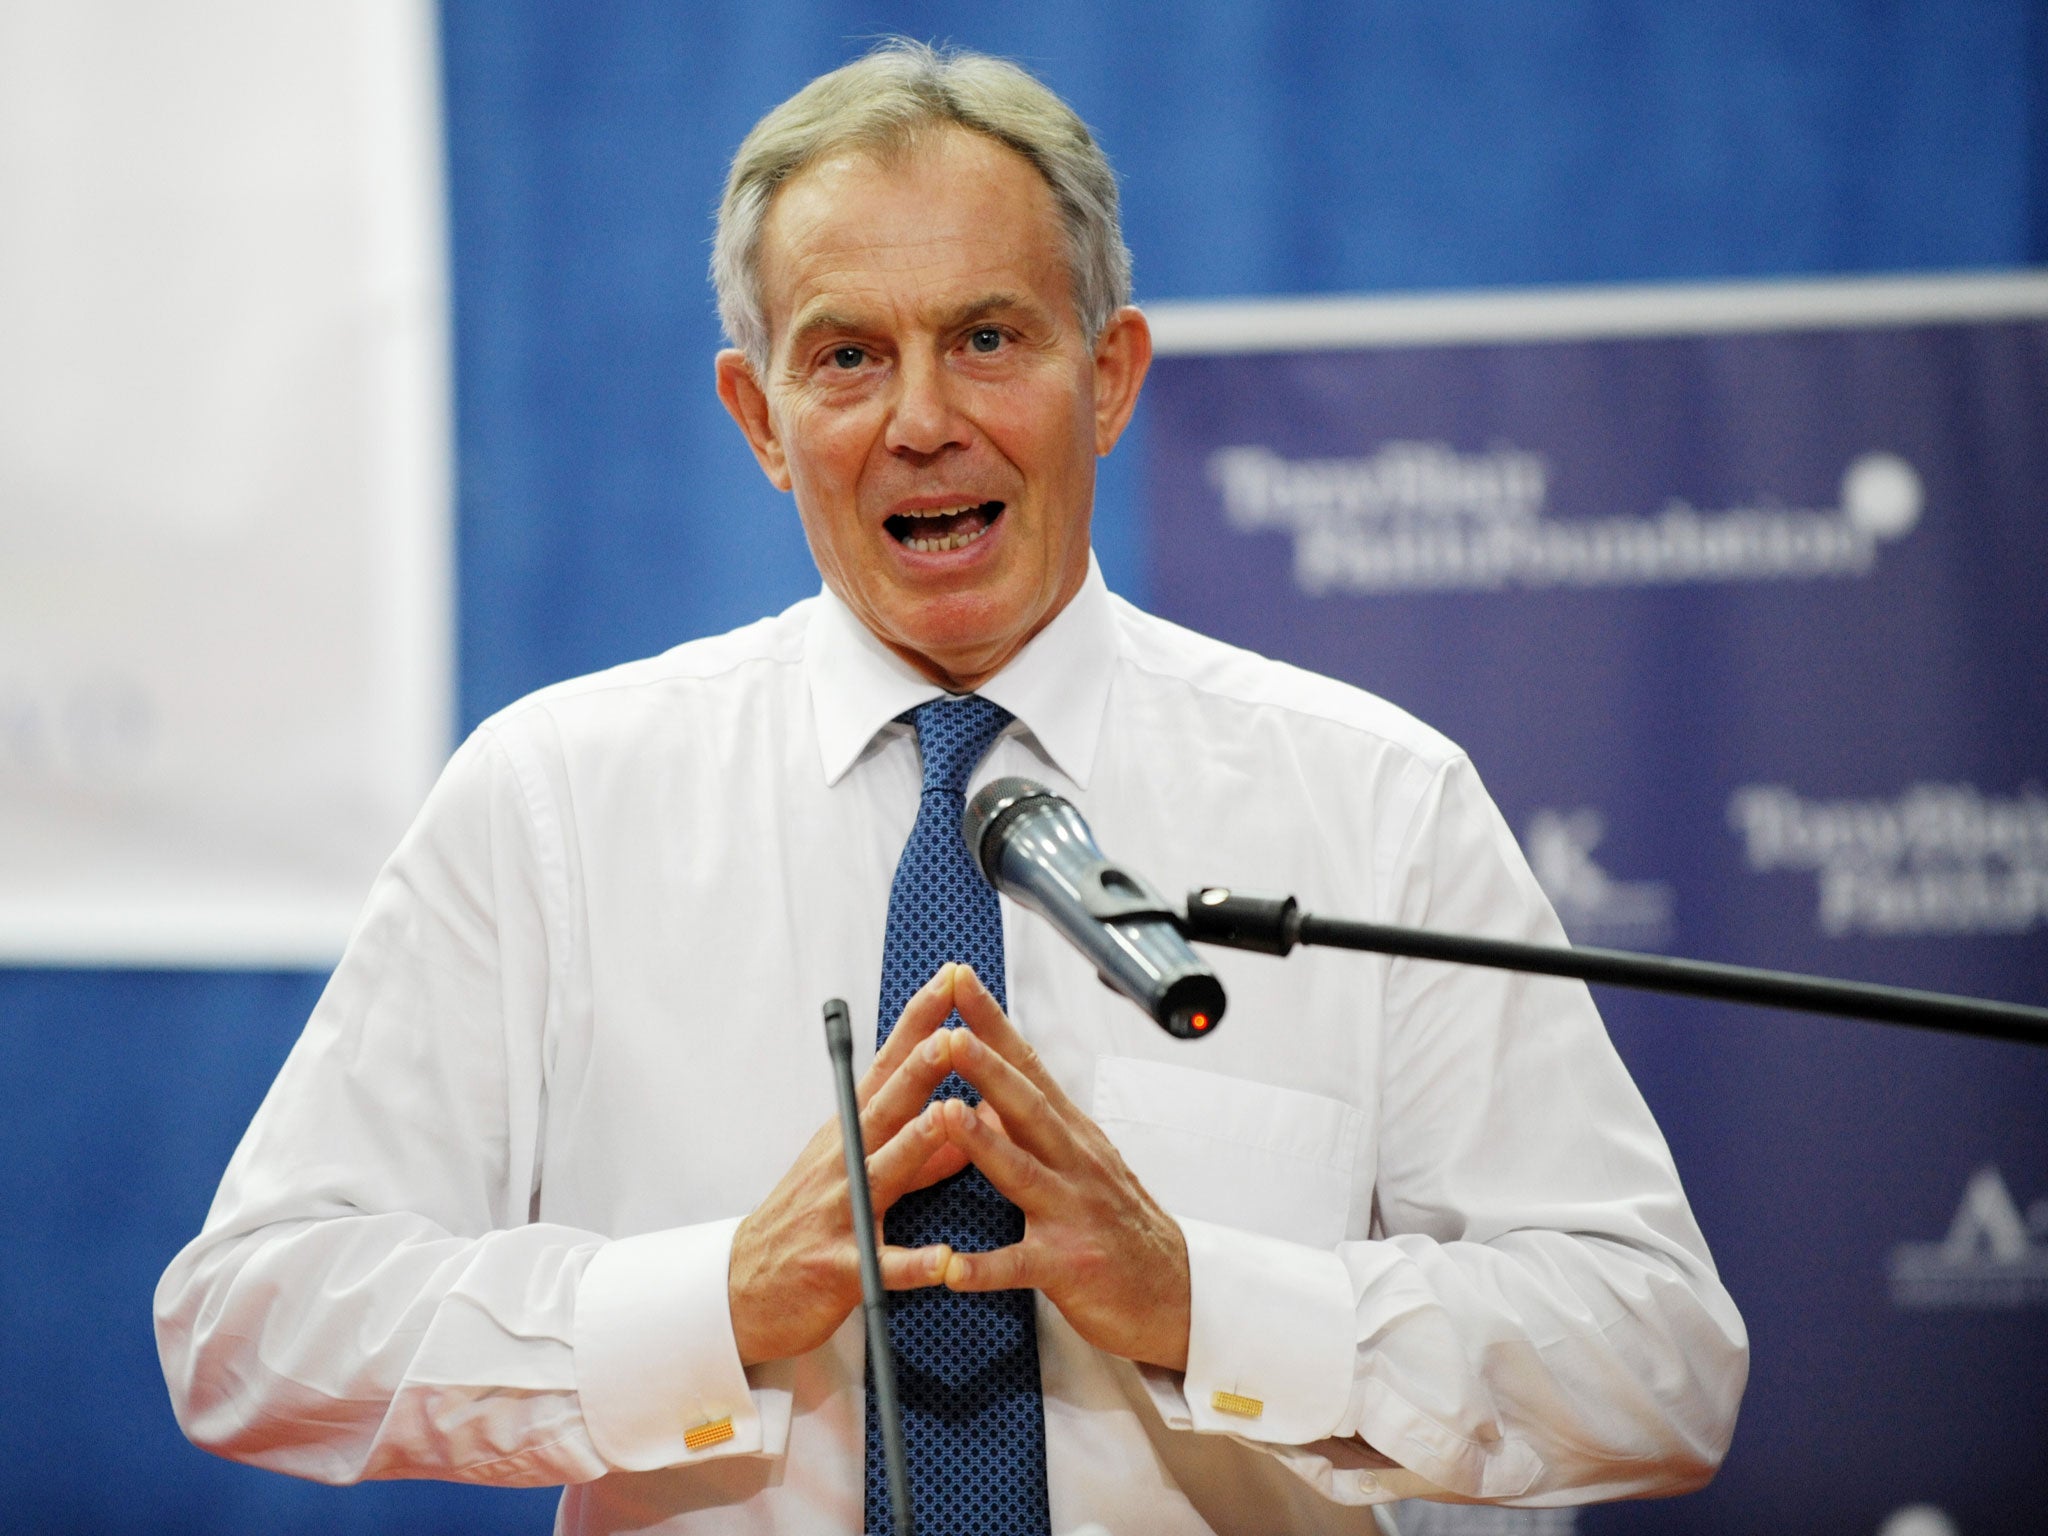 Tony Blair, pictured speaking in his role as founder of the Tony Blair Faith Foundation at the University of Pristina in 2012